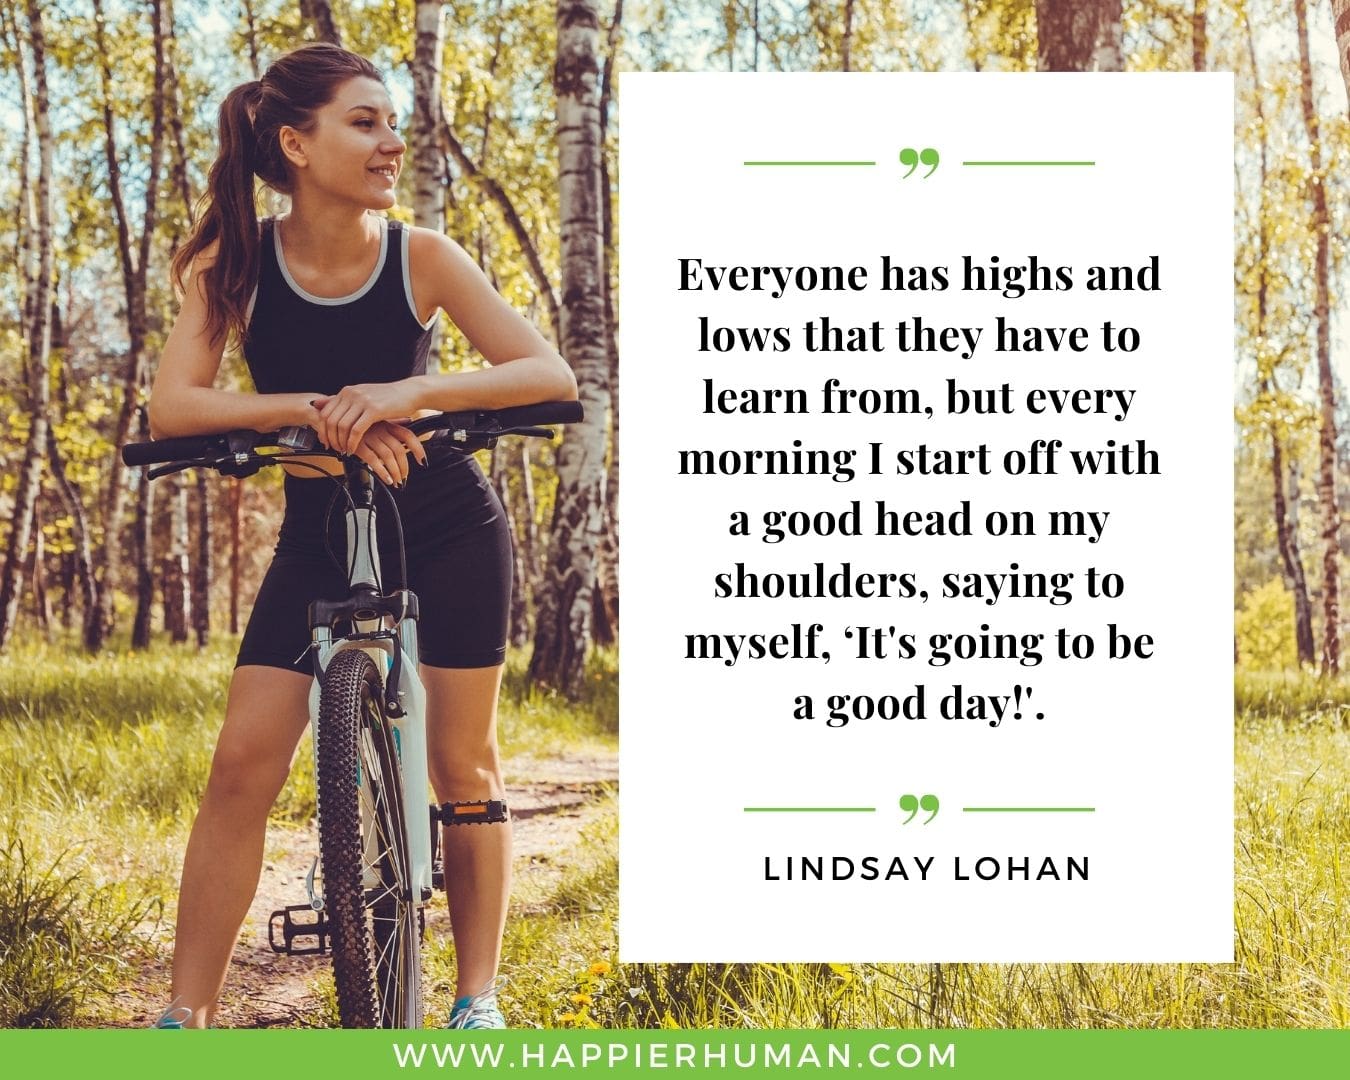 Great Day Quotes - “Everyone has highs and lows that they have to learn from, but every morning I start off with a good head on my shoulders, saying to myself, 'It's going to be a good day!'.” – Lindsay Lohan